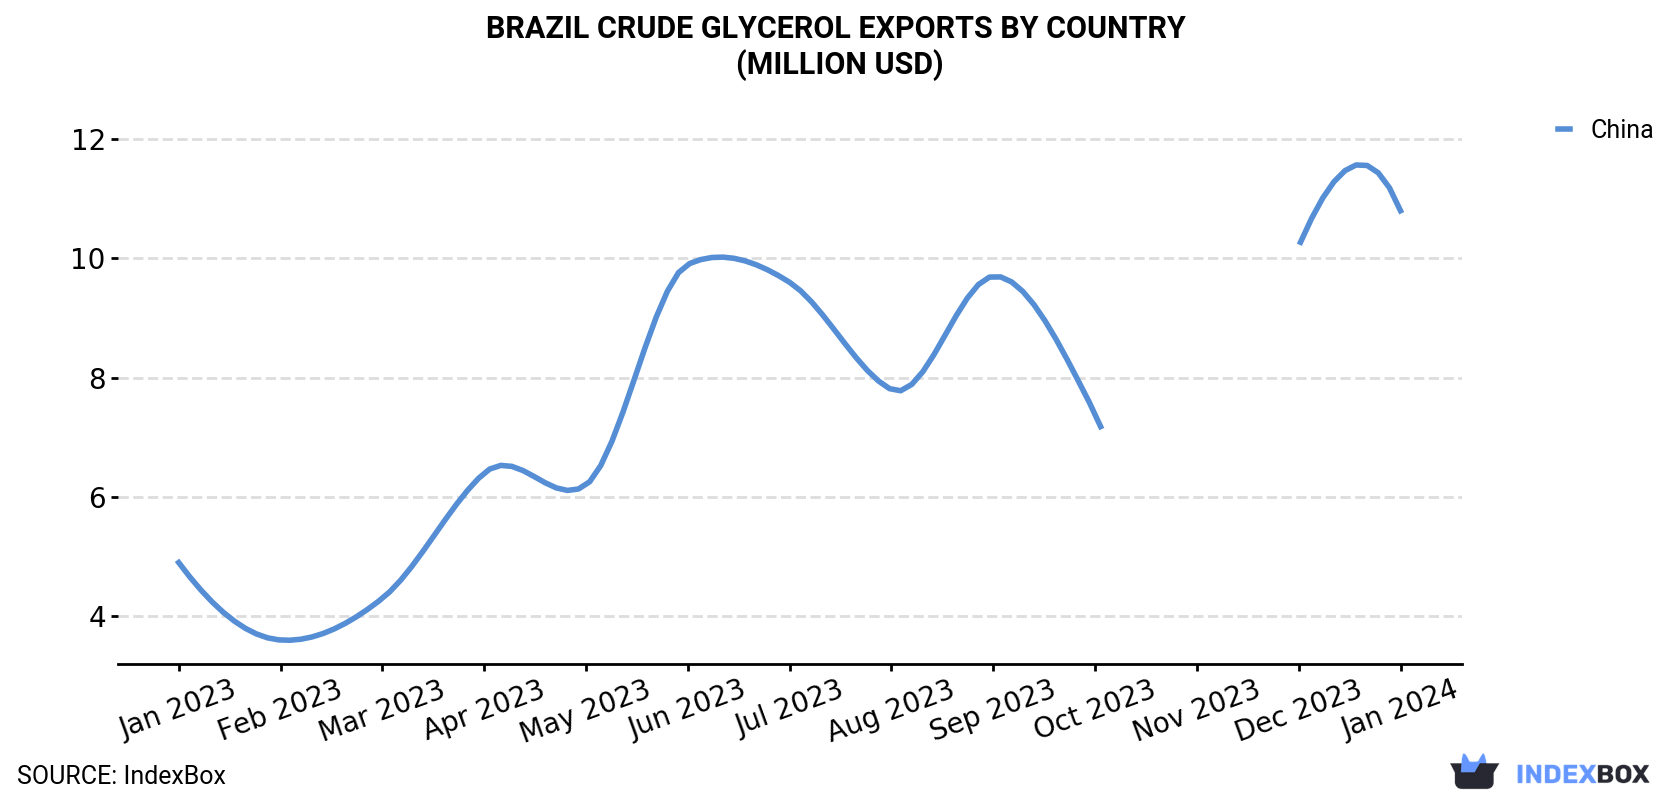 Brazil Crude Glycerol Exports By Country (Million USD)